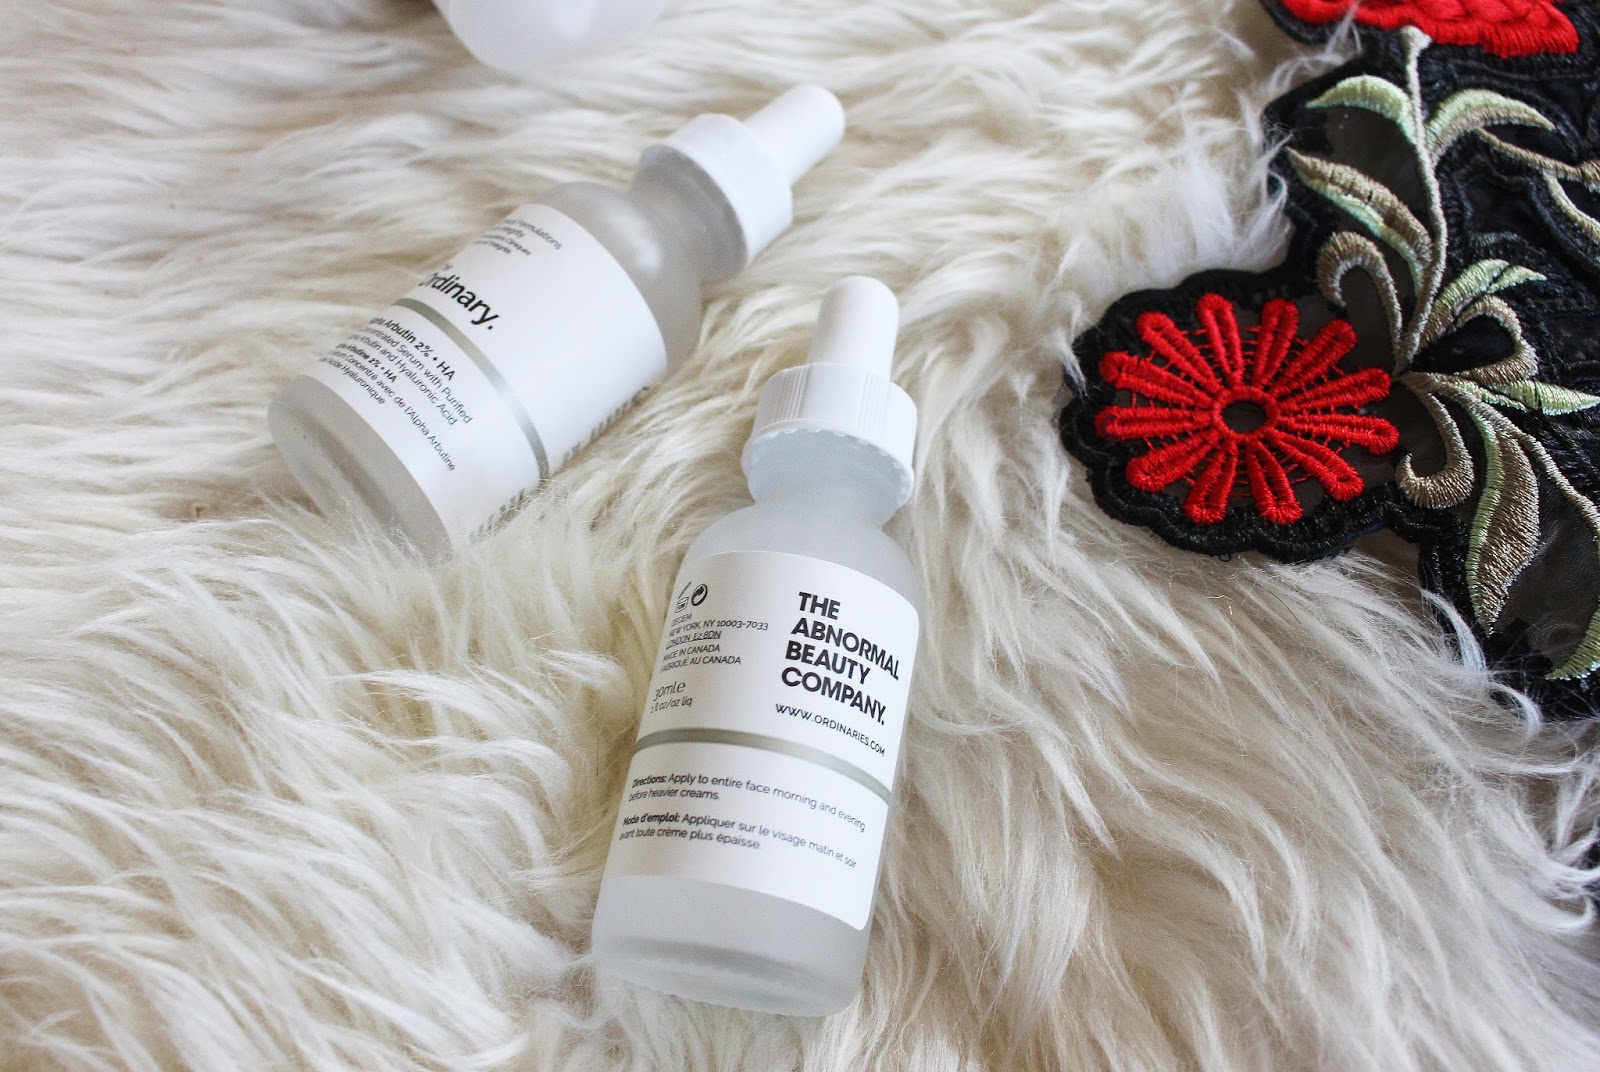 the ordinary skincare, the ordinary, the ordinary uk, the ordinary review uk, asos beauty, cheap skincare, quick blemish fix, skincare routine 2017